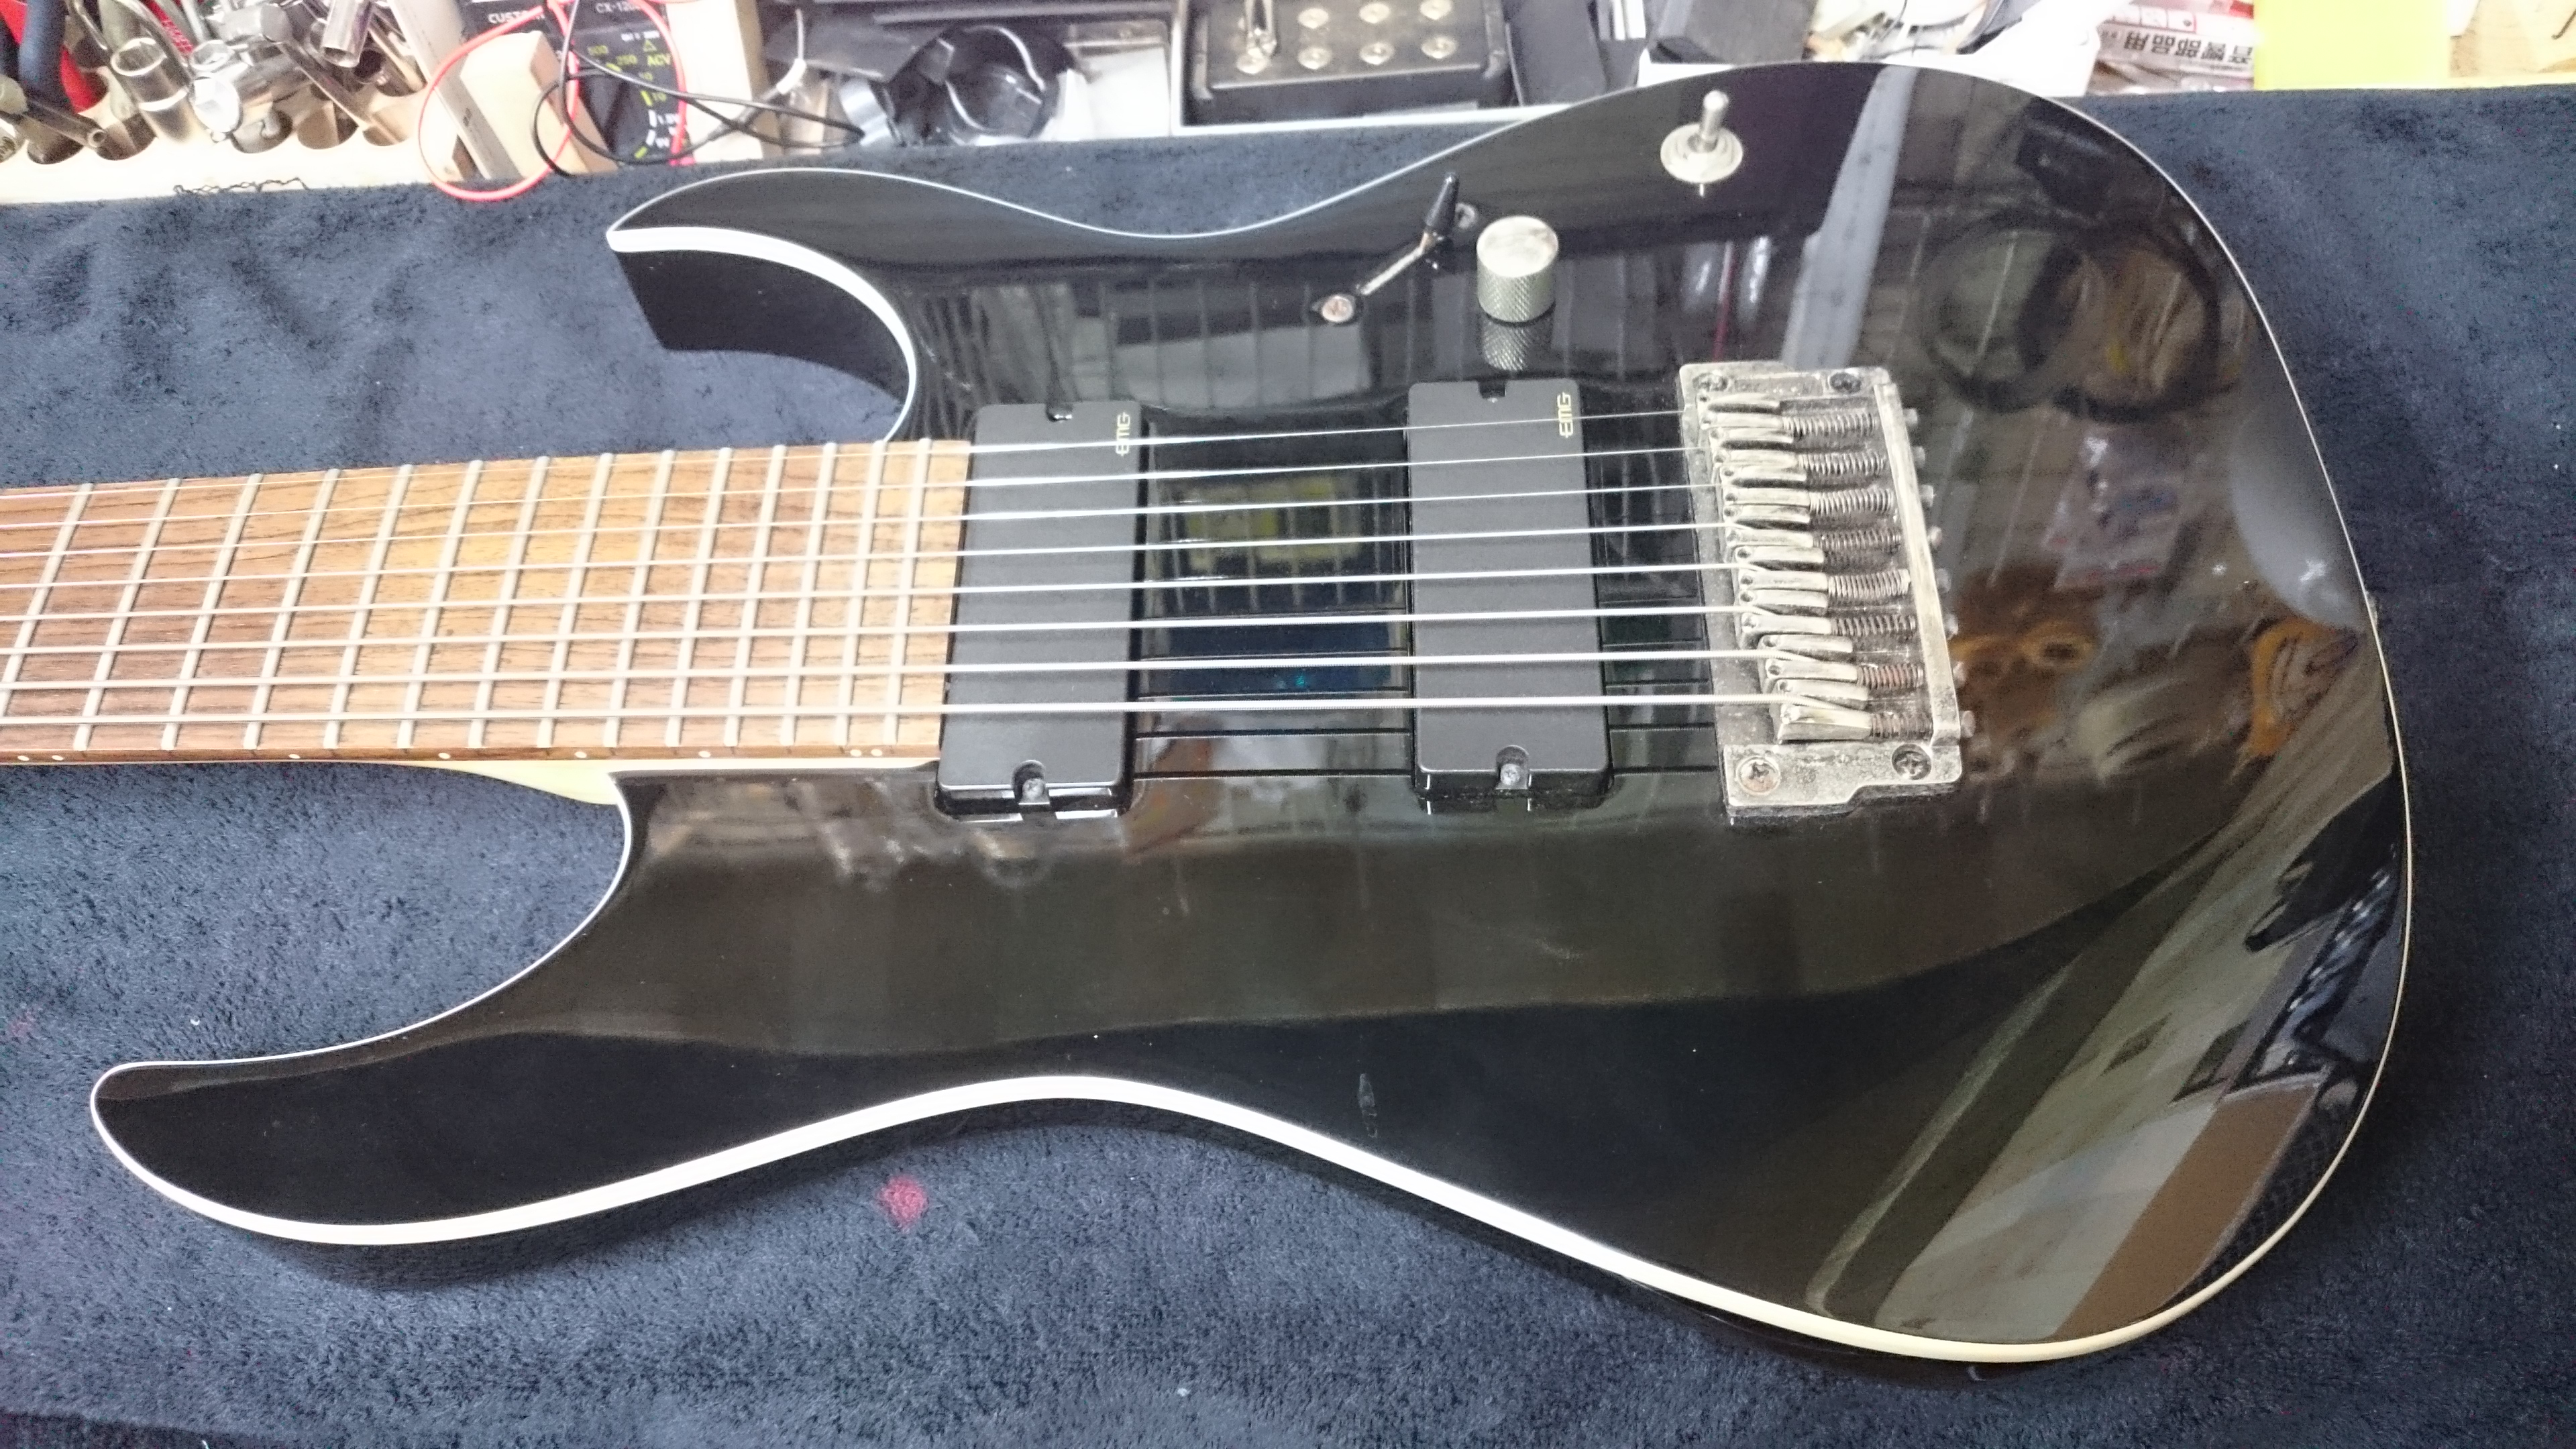 Ibanez RG 8弦 セットアップ | ギターリペア工房DNS-Draw a New Sound-